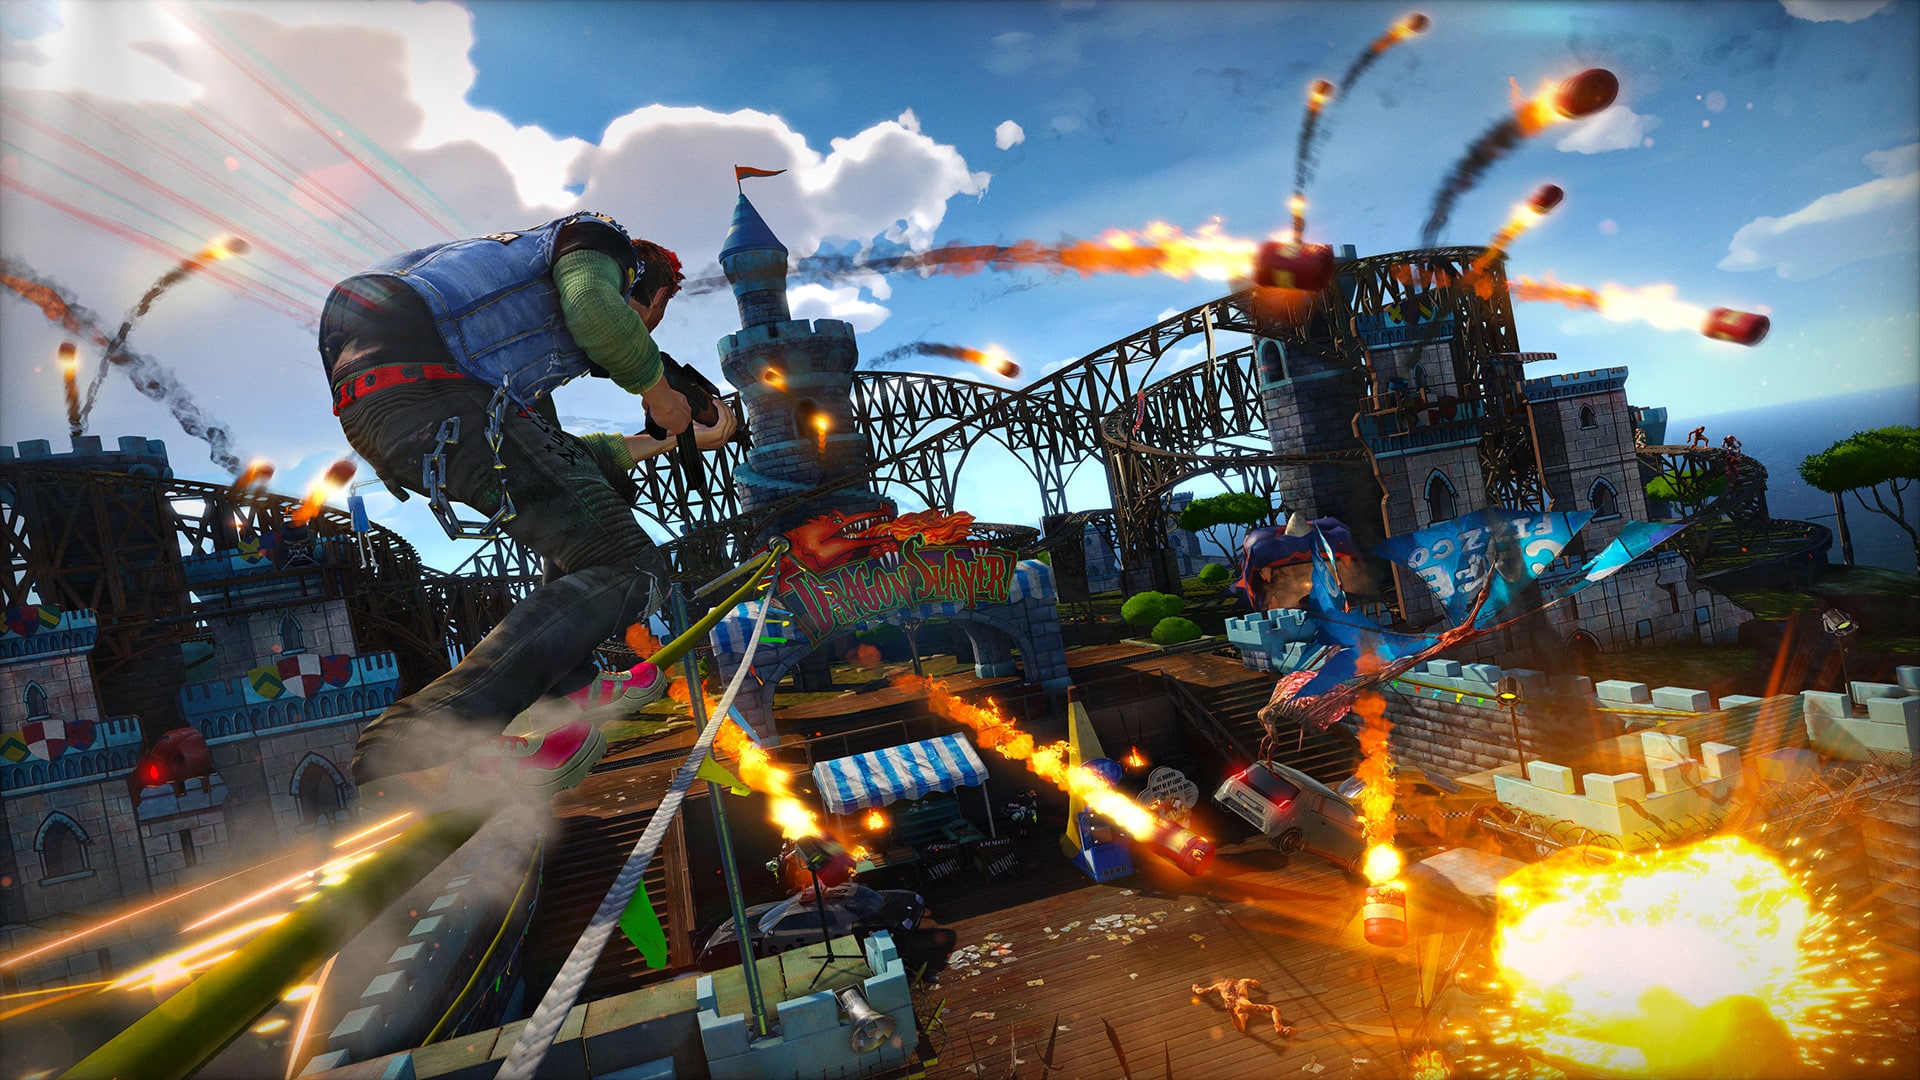 Insomniac Games Reportedly Made Only $567 on Sunset Overdrive